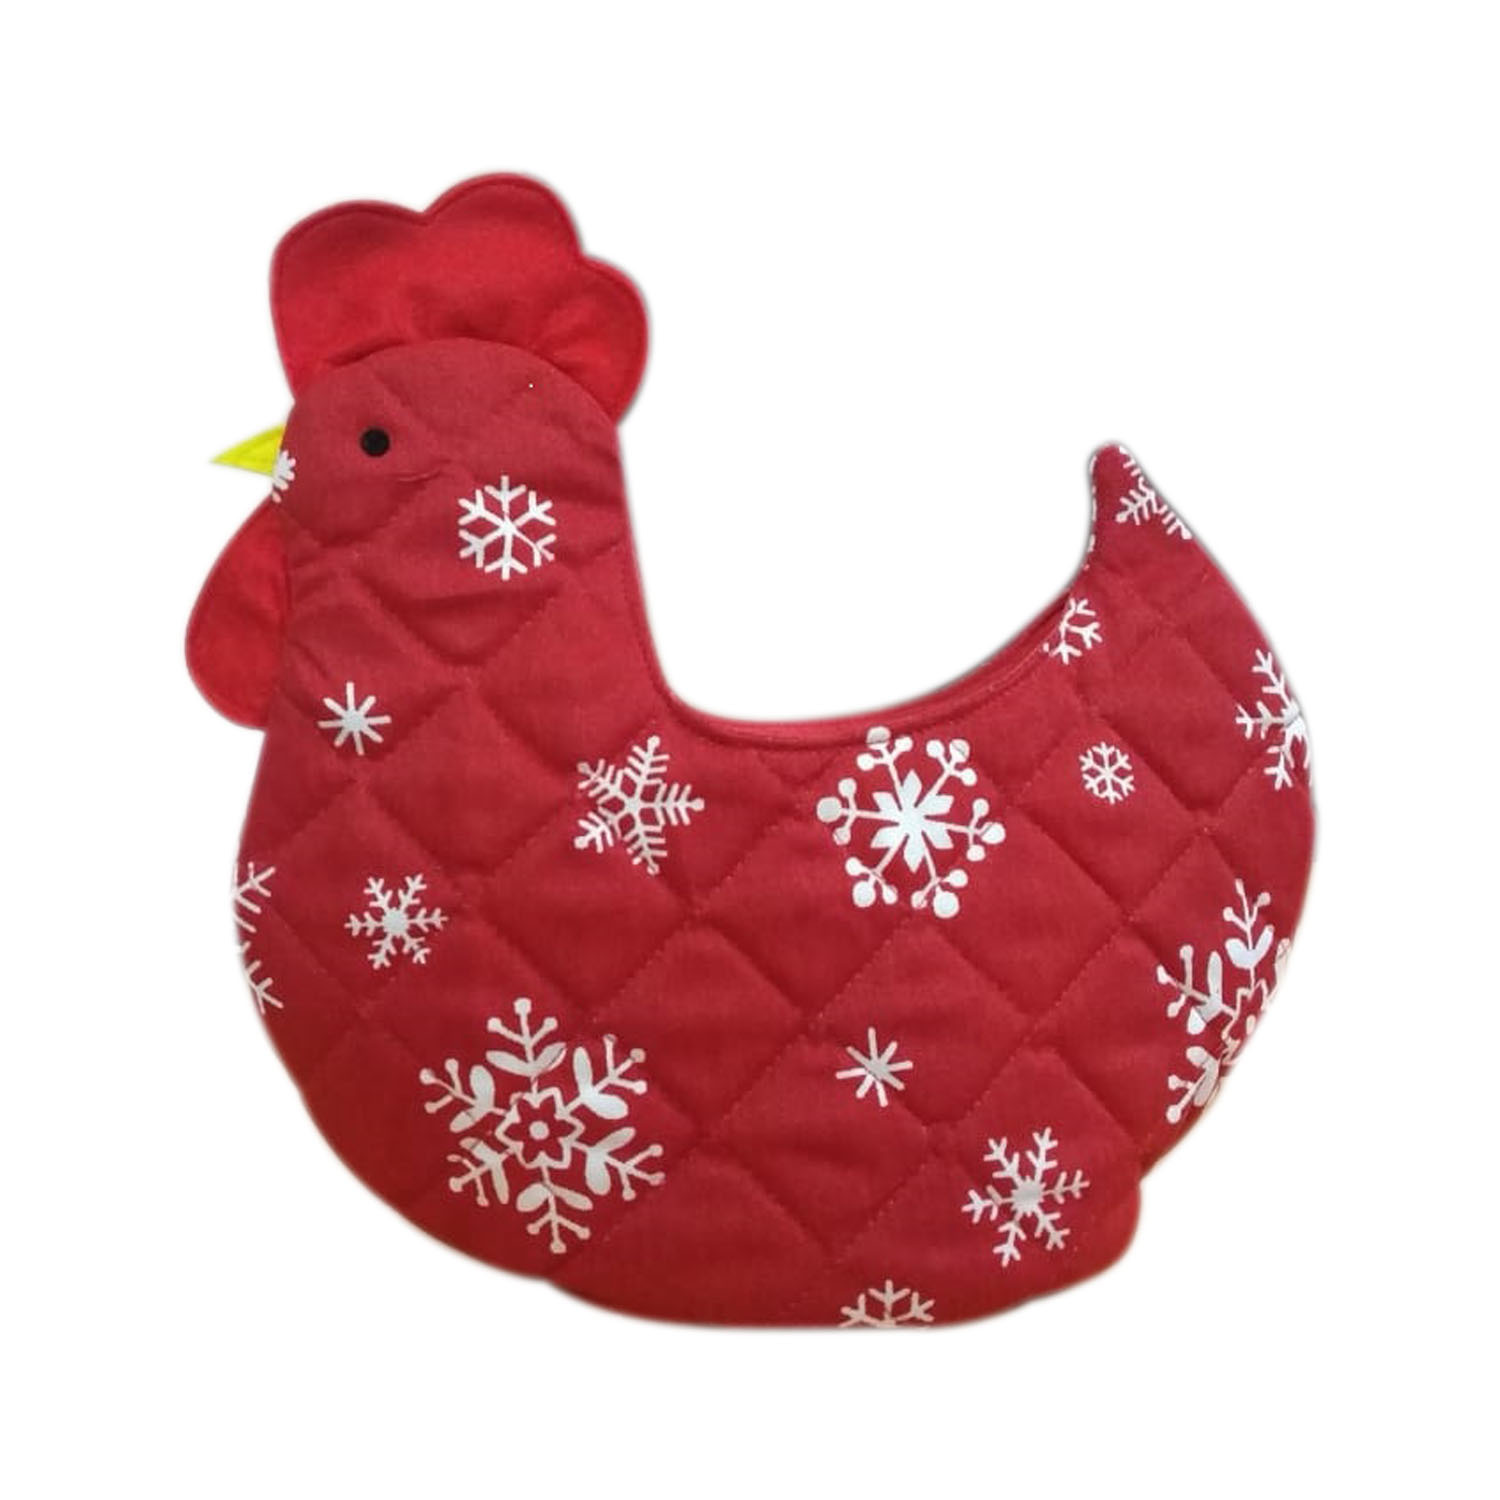 Primary image for Organic Chicken Shaped Fabric Egg Storage Basket - Red With White Stars Design